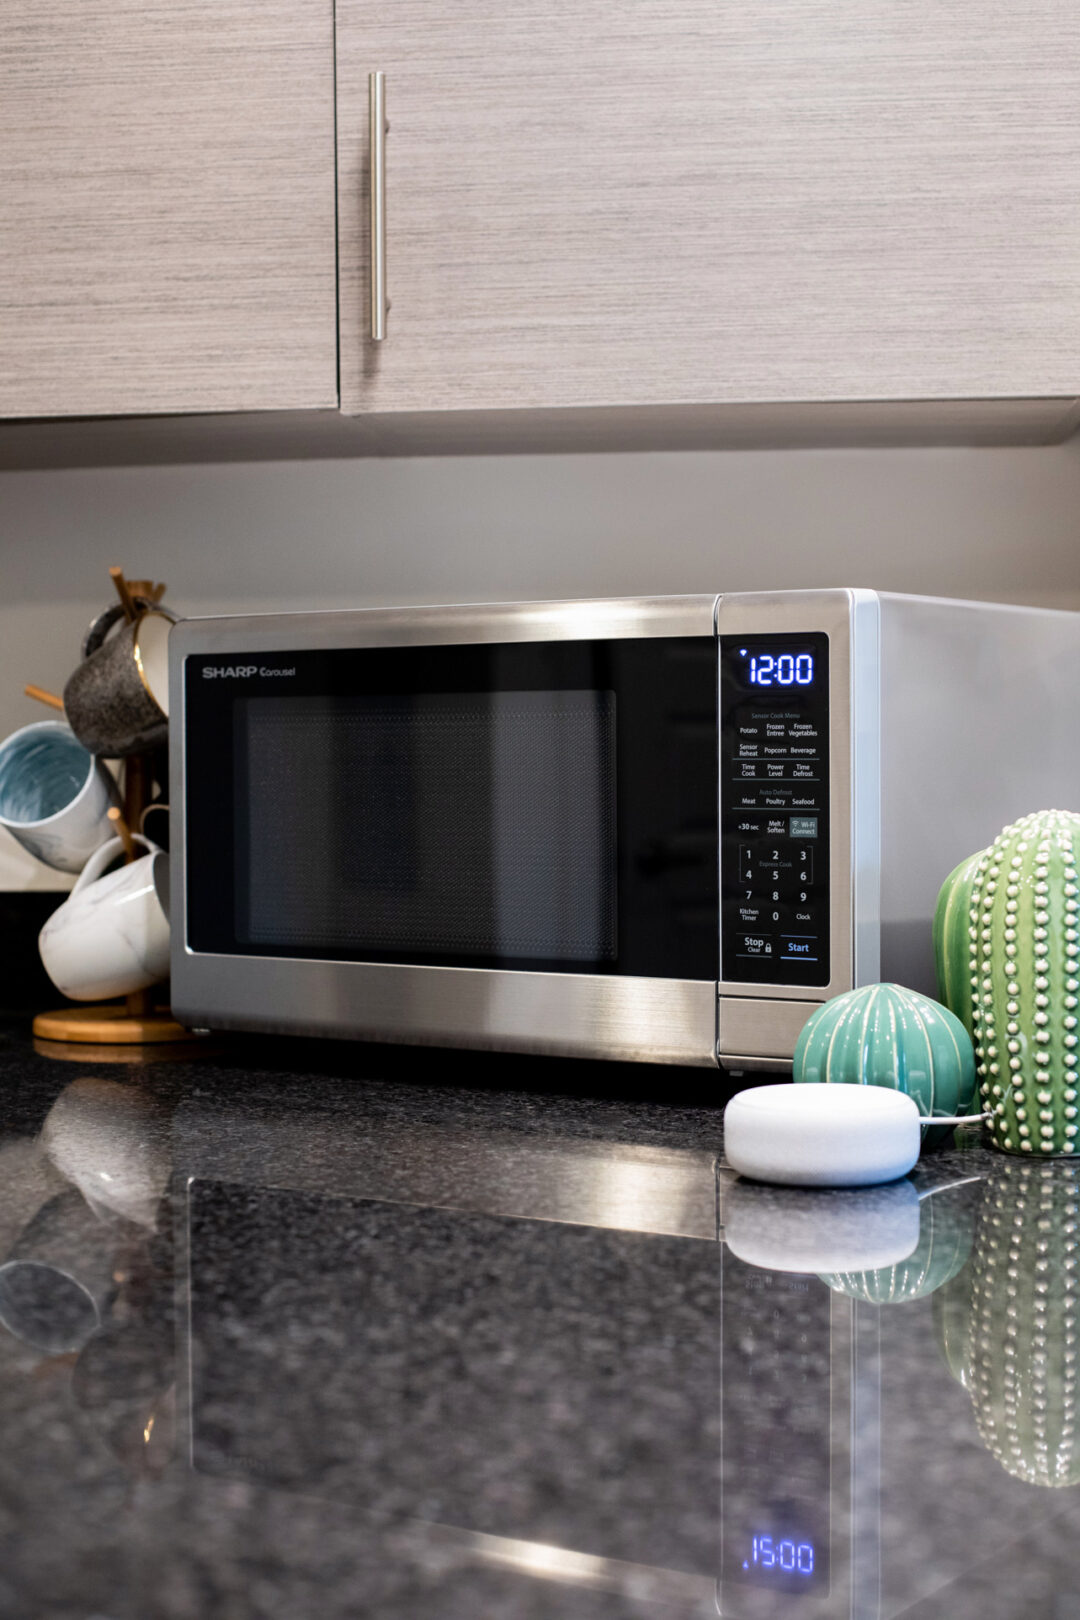 Sharp microwave on a countertop with Amazon Echo